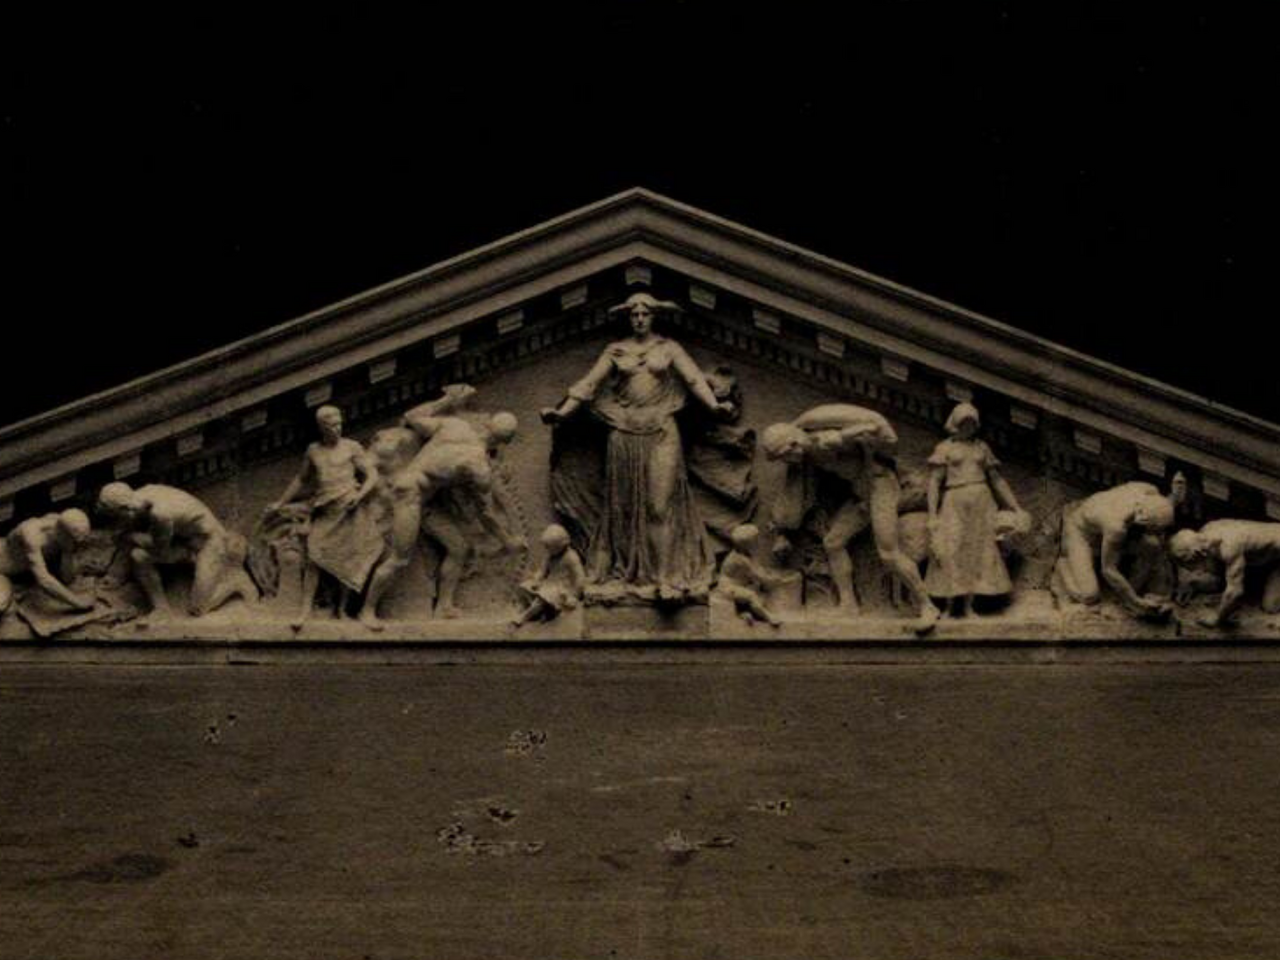 Photograph of the pediment from the NY stock exchange